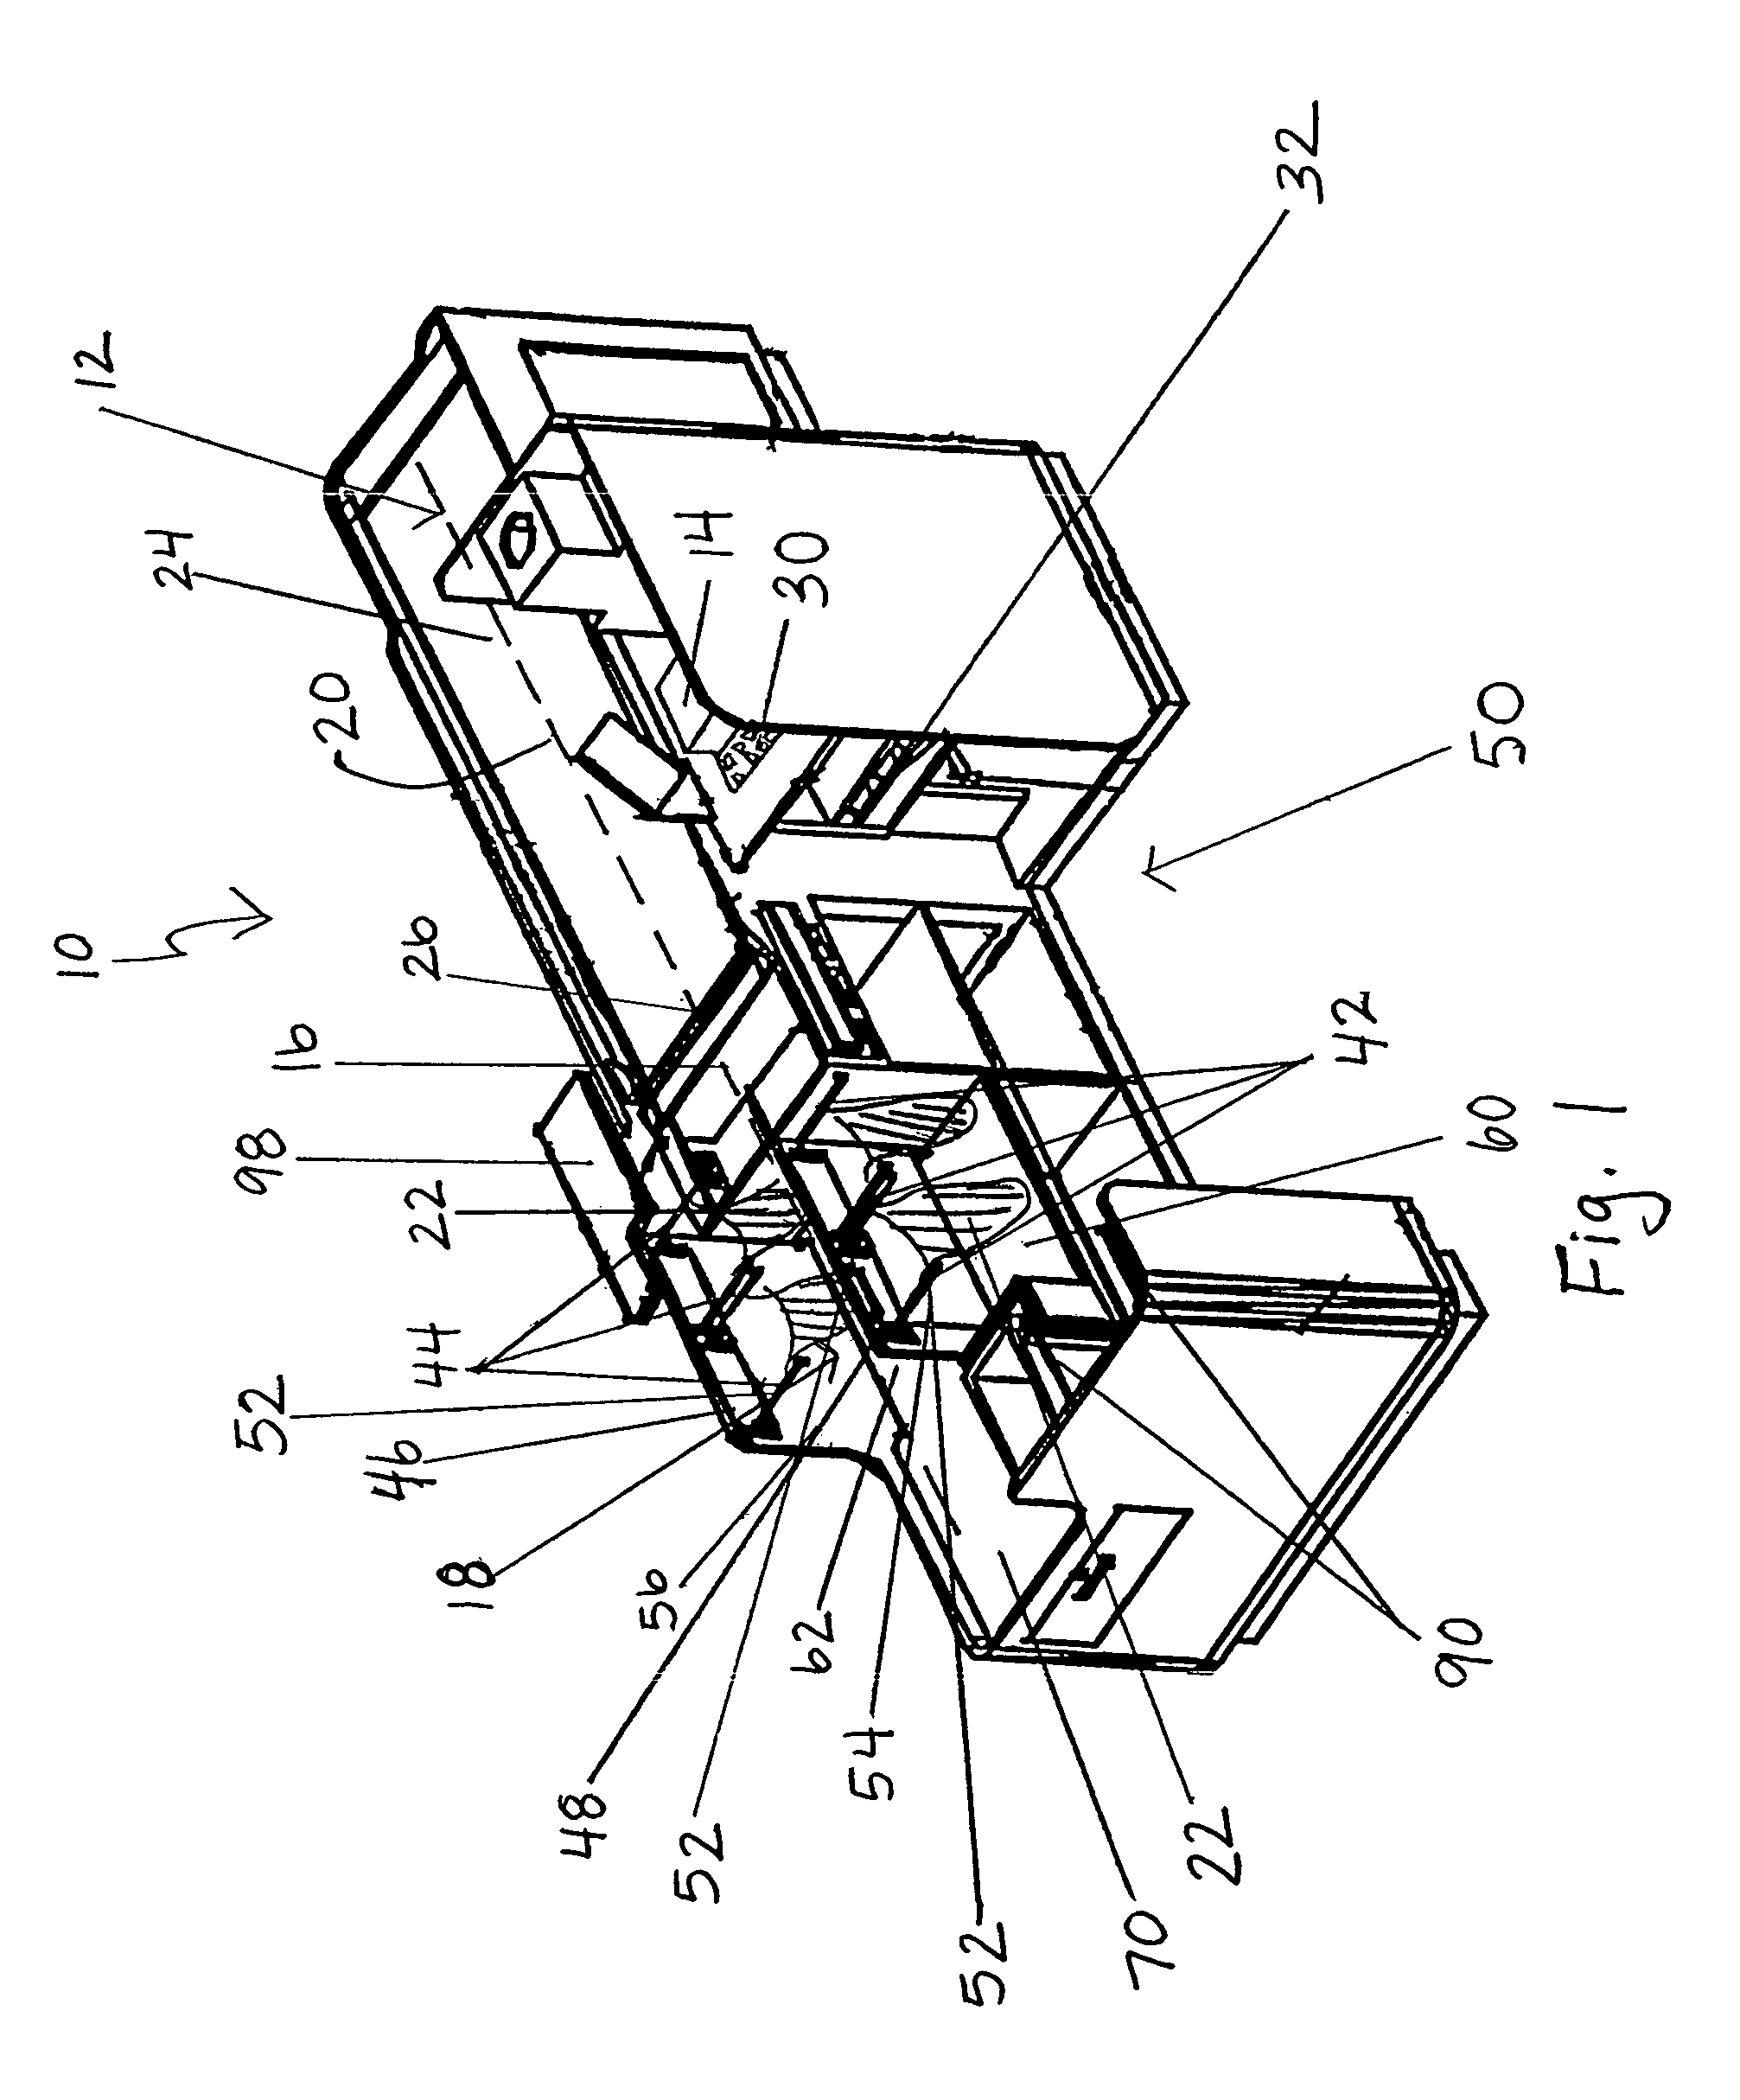 Check-out counter systems and methods